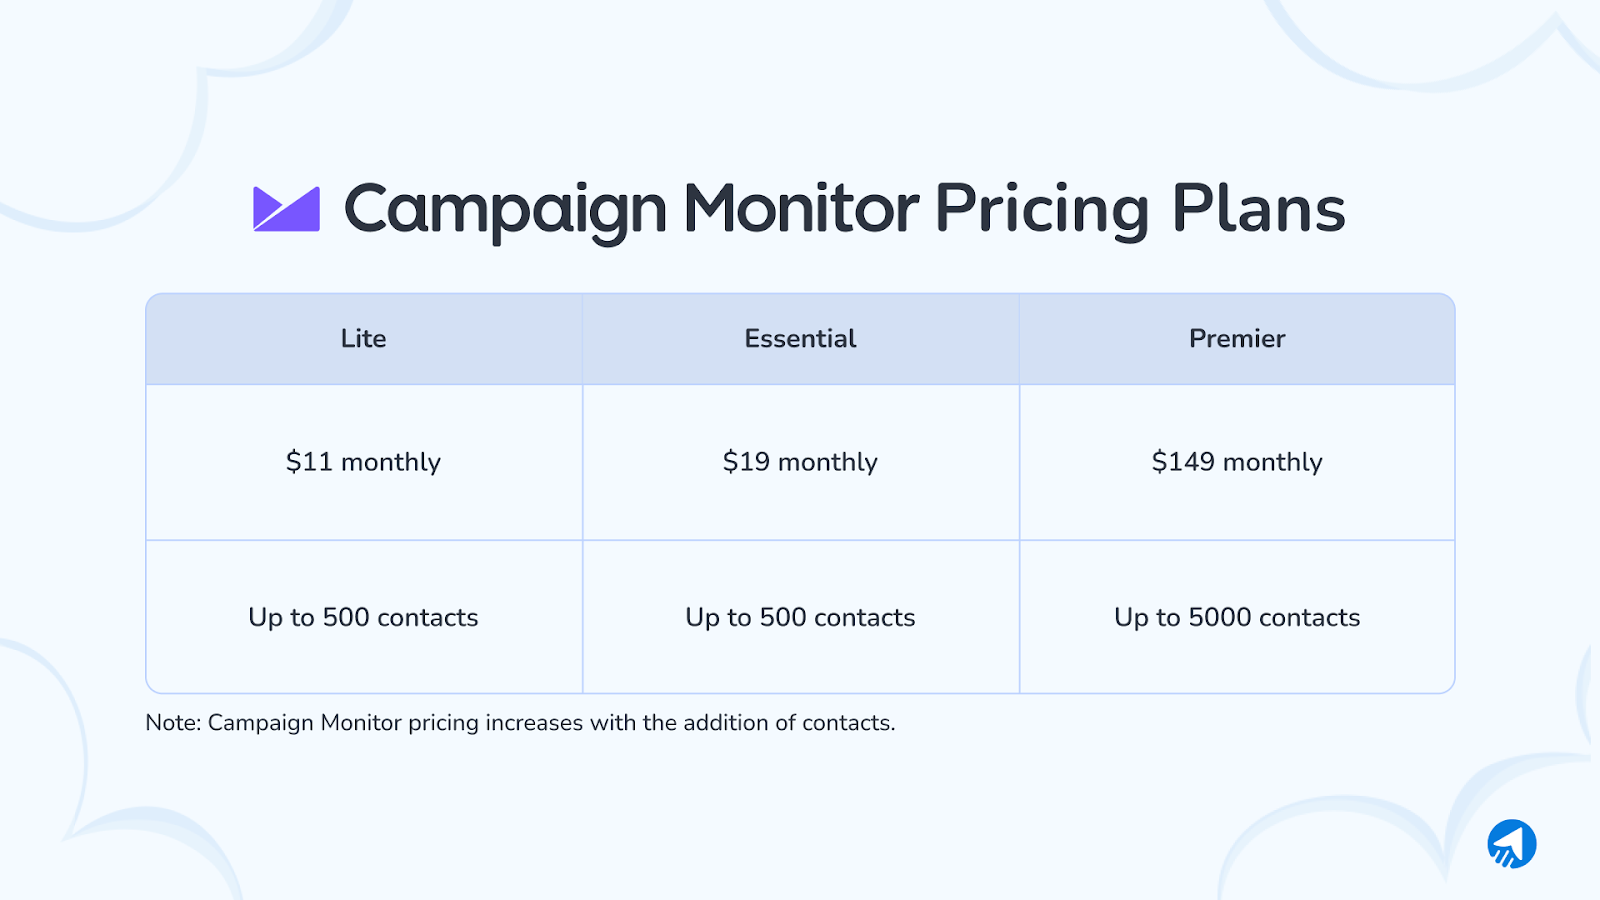 Campaign Monitor pricing plans.